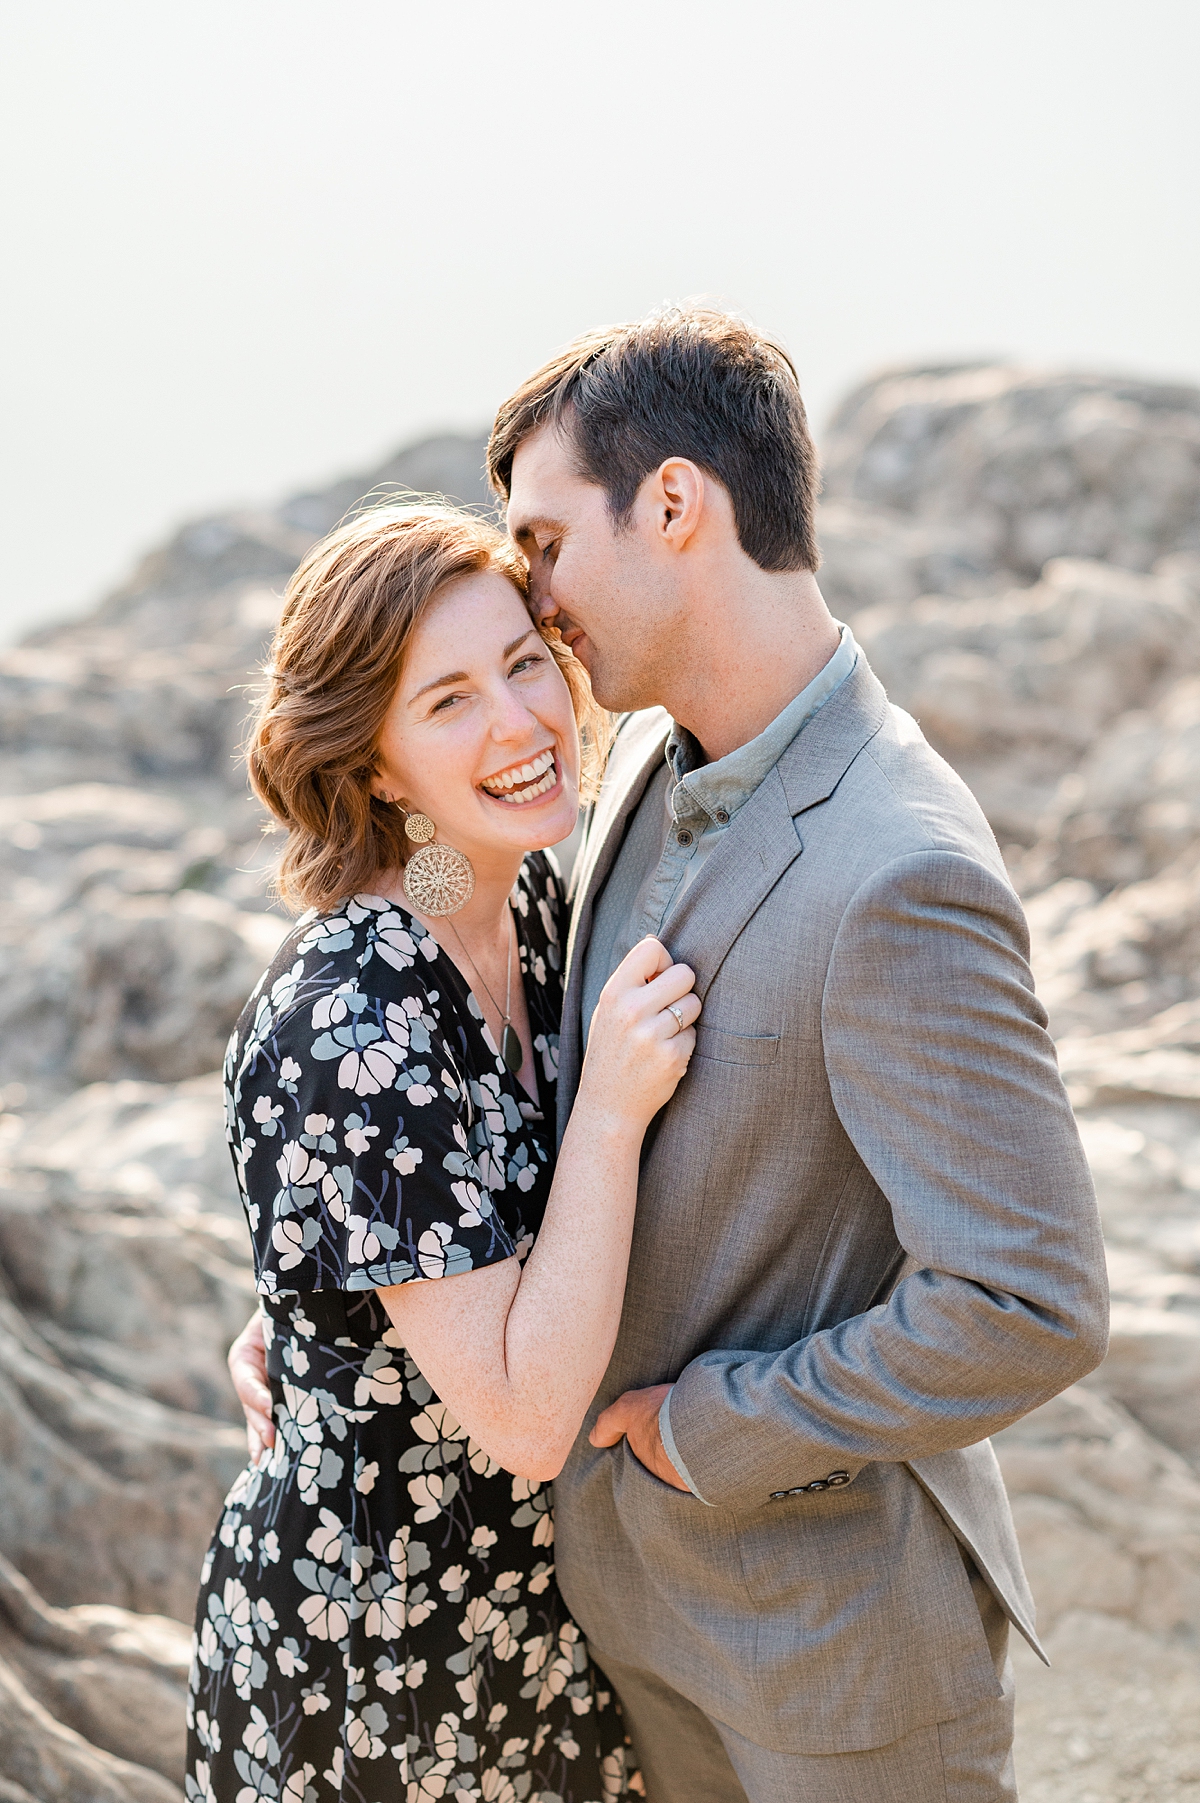 A Summer Raven's Roost Overlook Engagement Session with Mountain Views. Photography by Virginia Wedding Photographer Kailey Brianne Photography. 